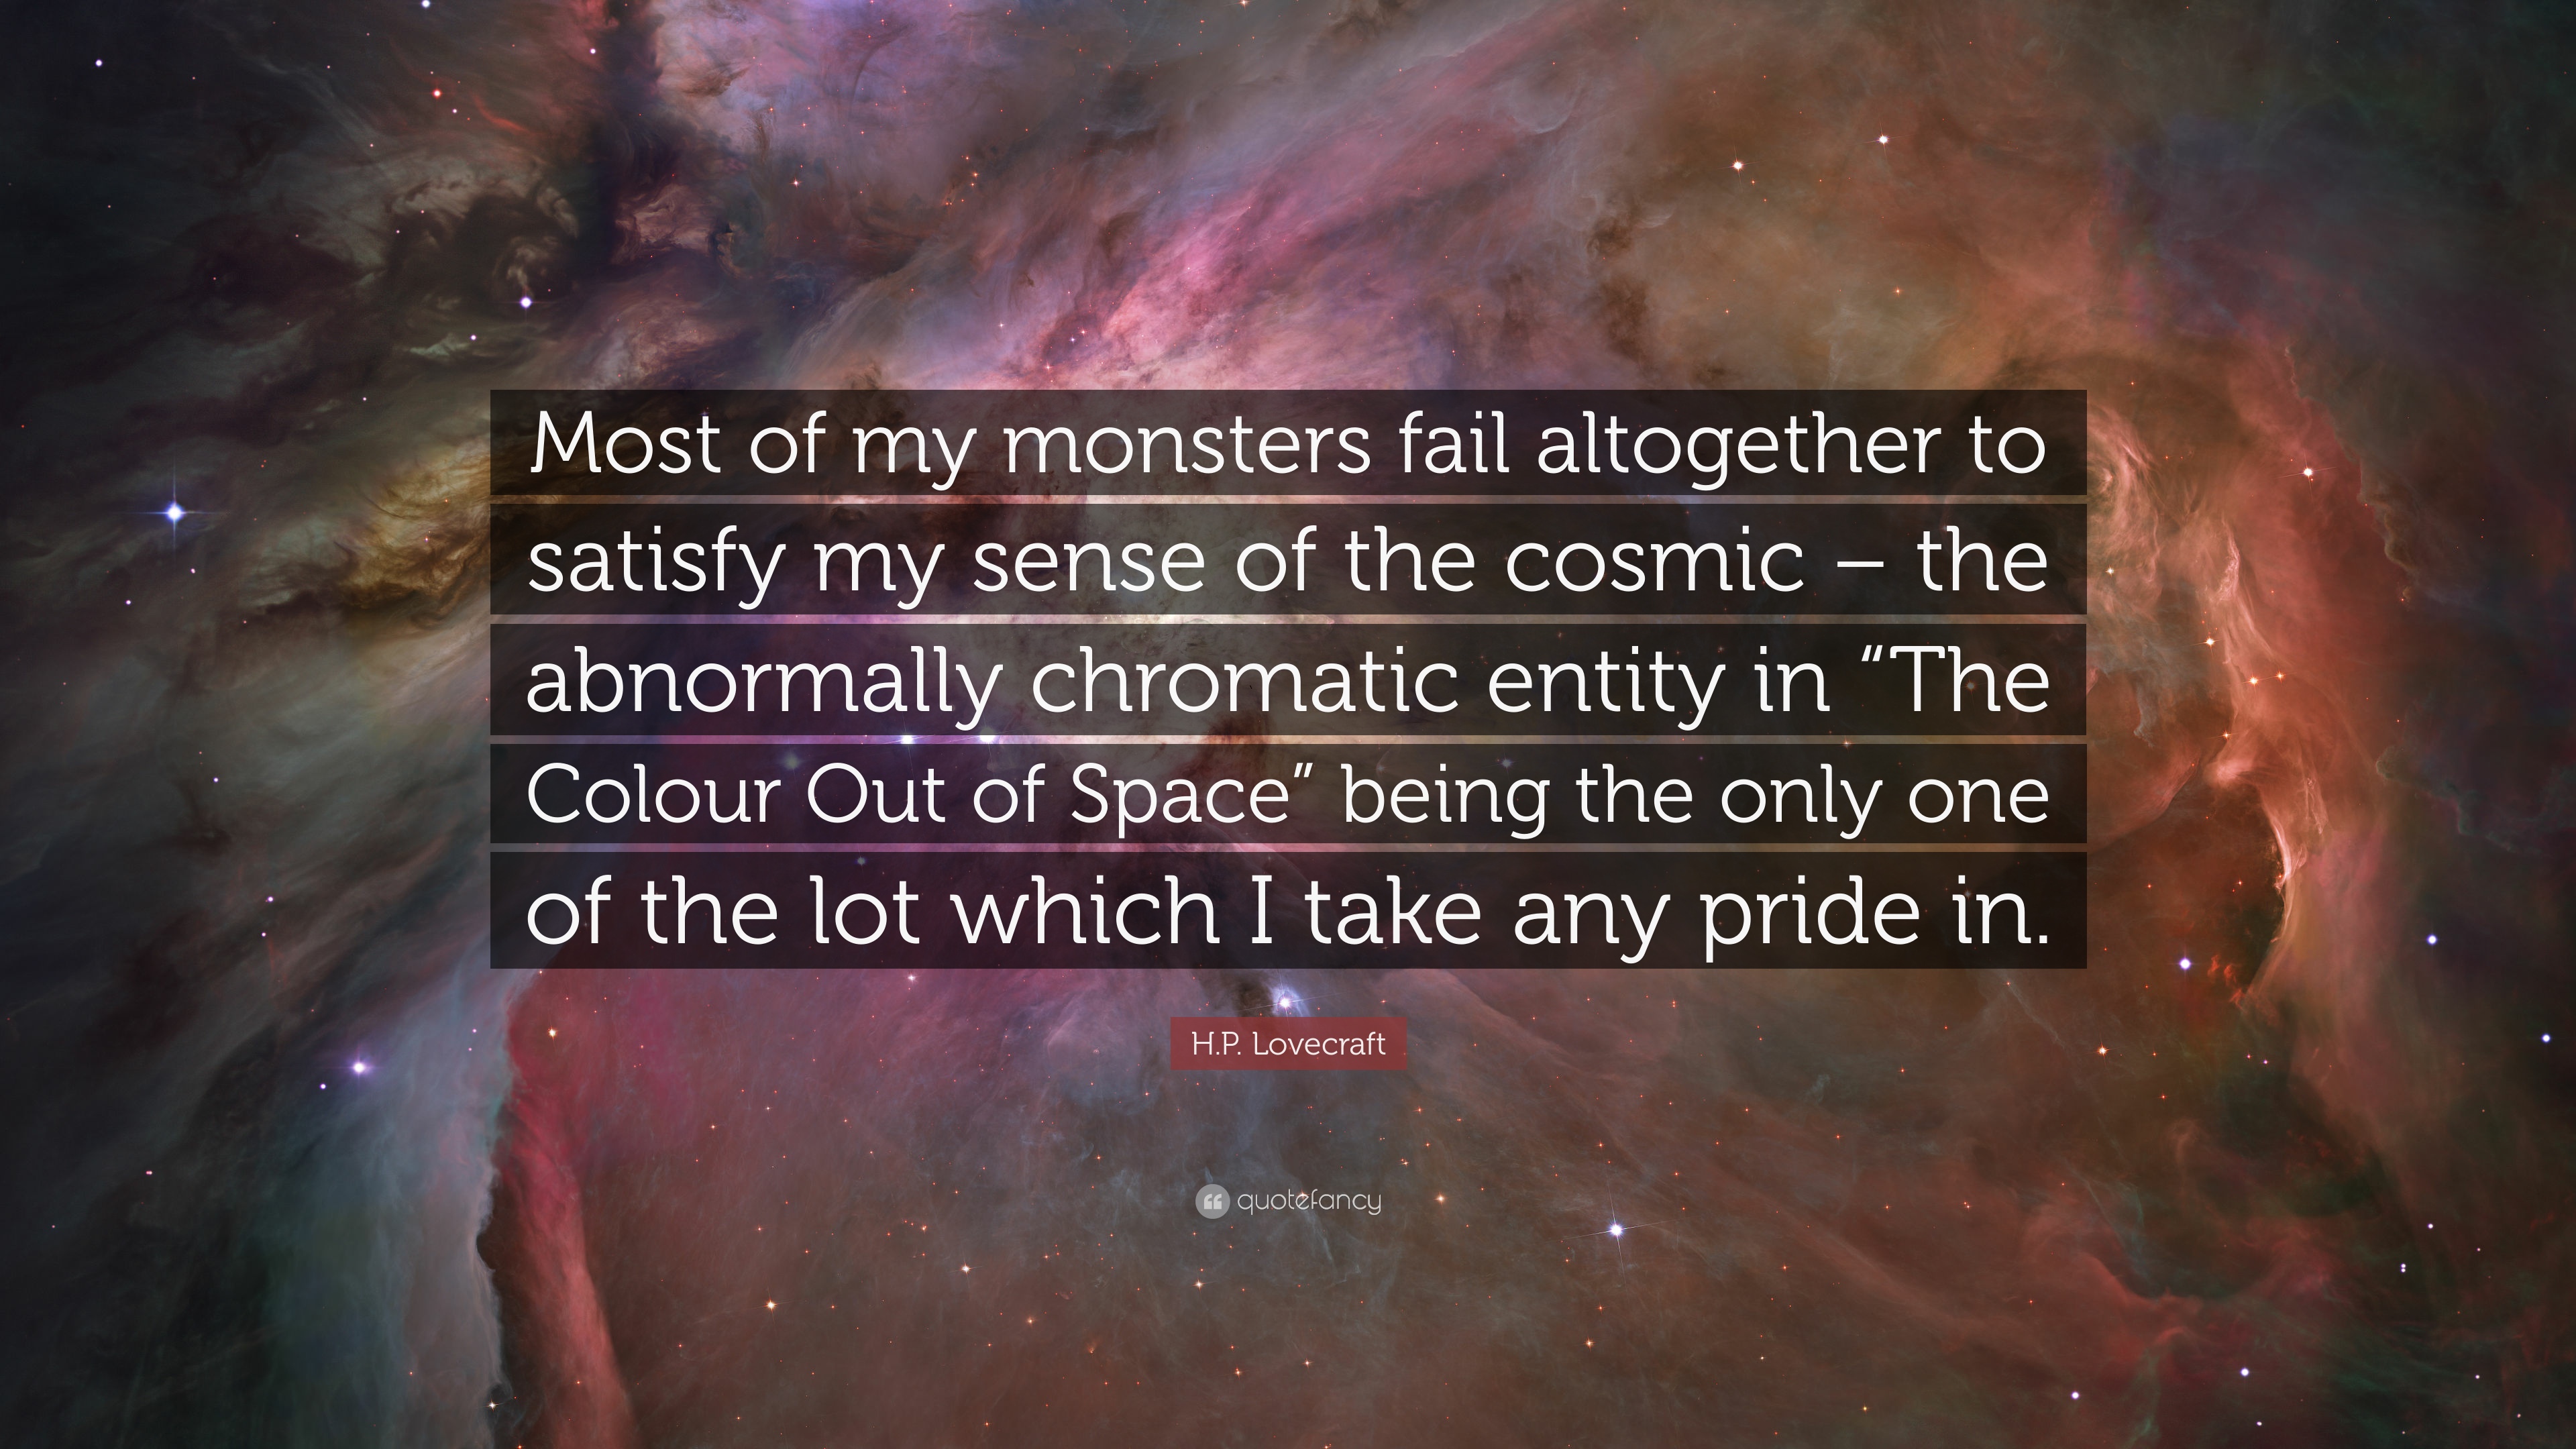 H.P. Lovecraft Quote: “Most of my monsters fail altogether